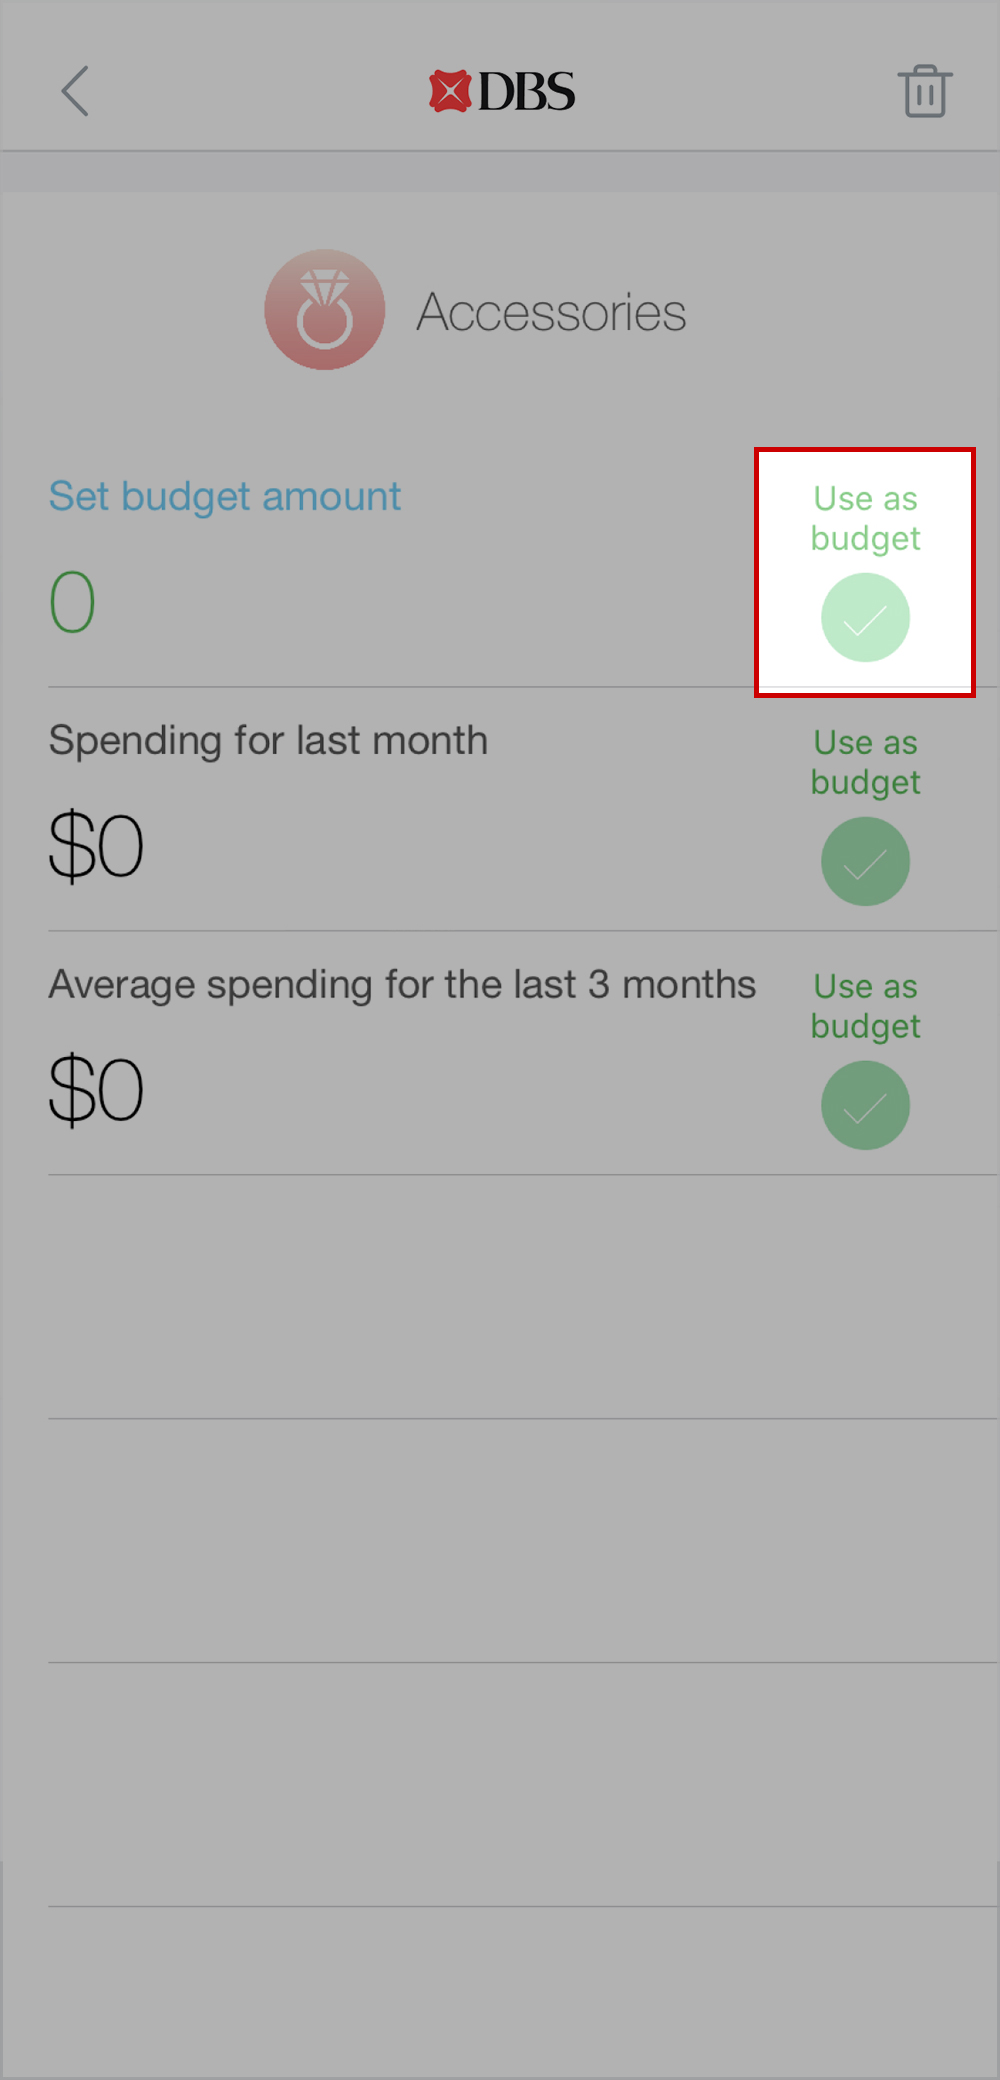 Input the budget amount and tap on “Use as budget” button as confirmation